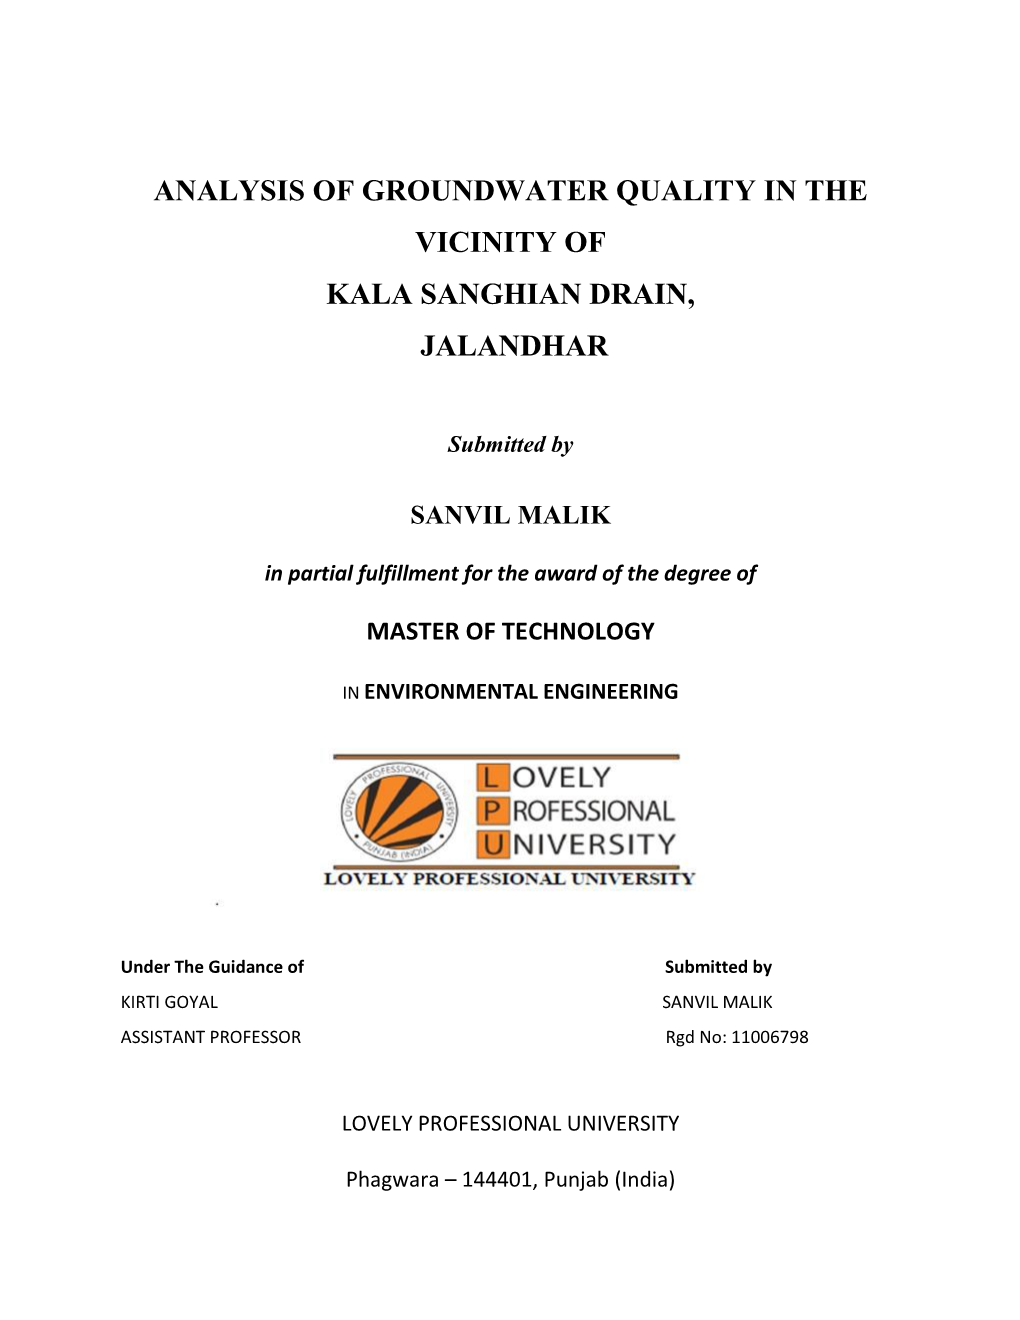 Analysis of Groundwater Quality in the Vicinity of Kala Sanghian Drain, Jalandhar